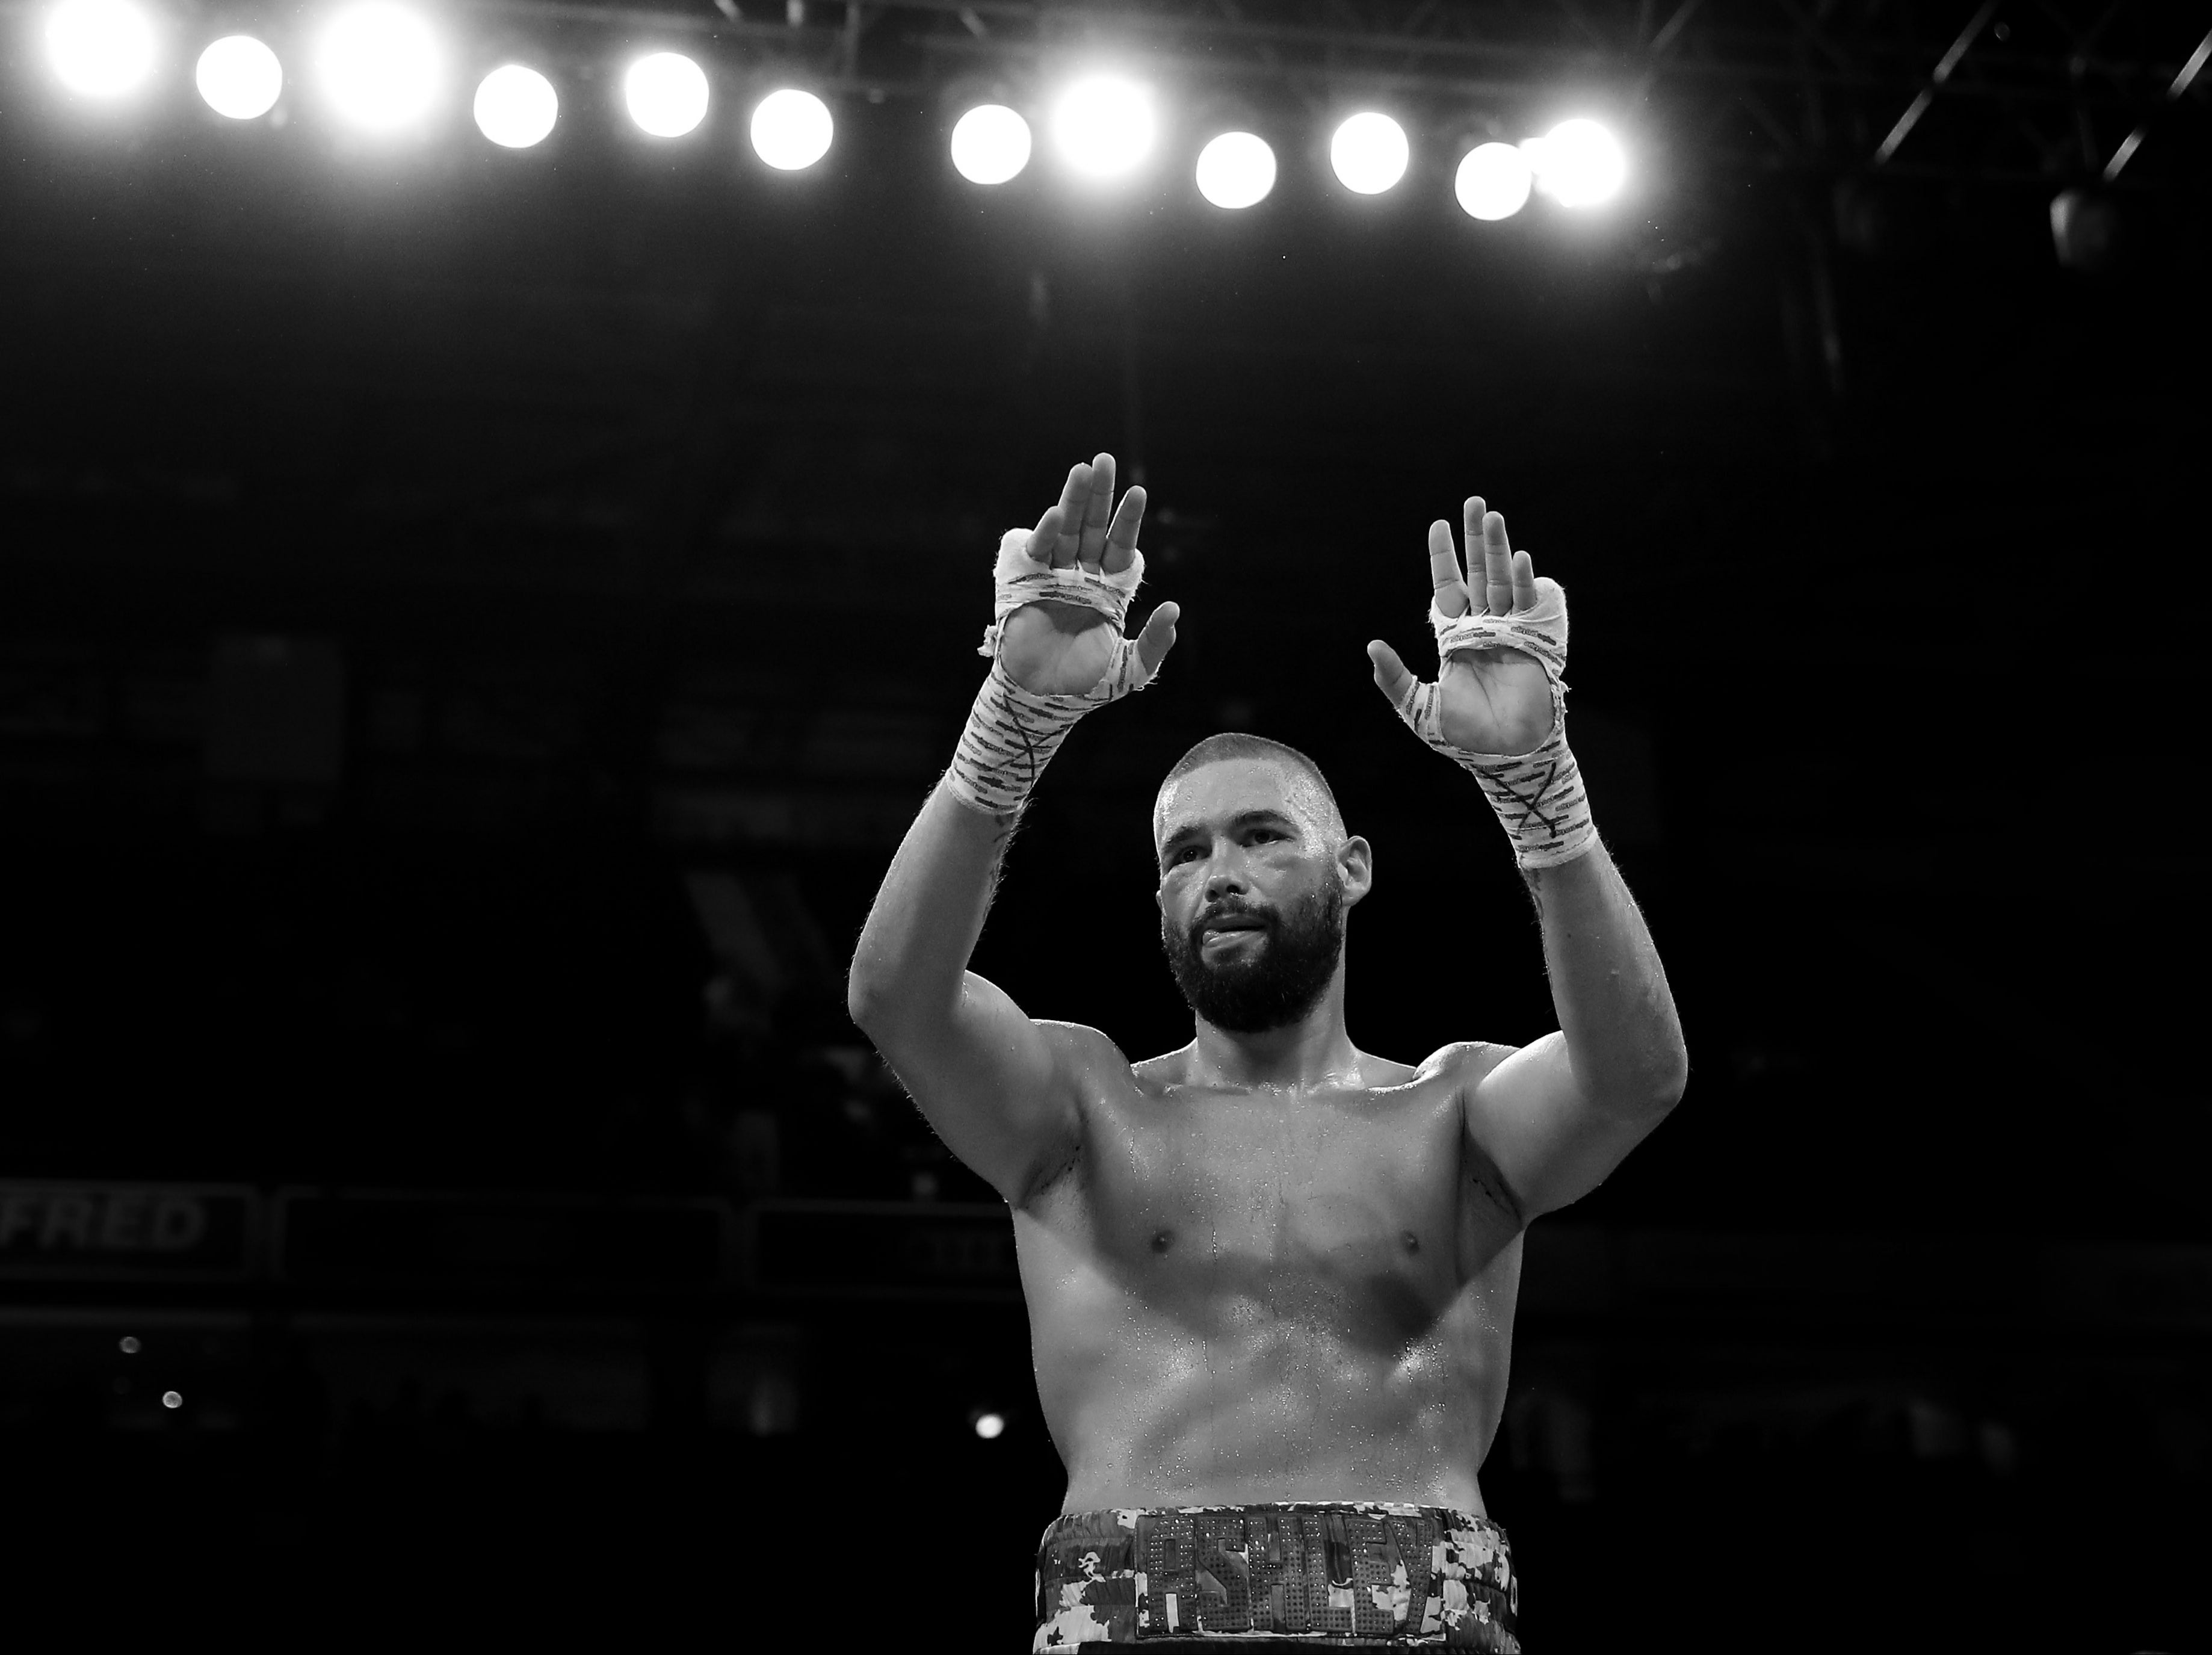 Tony Bellew retired from boxing in October 2018 following his defeat by Oleksandr Usyk